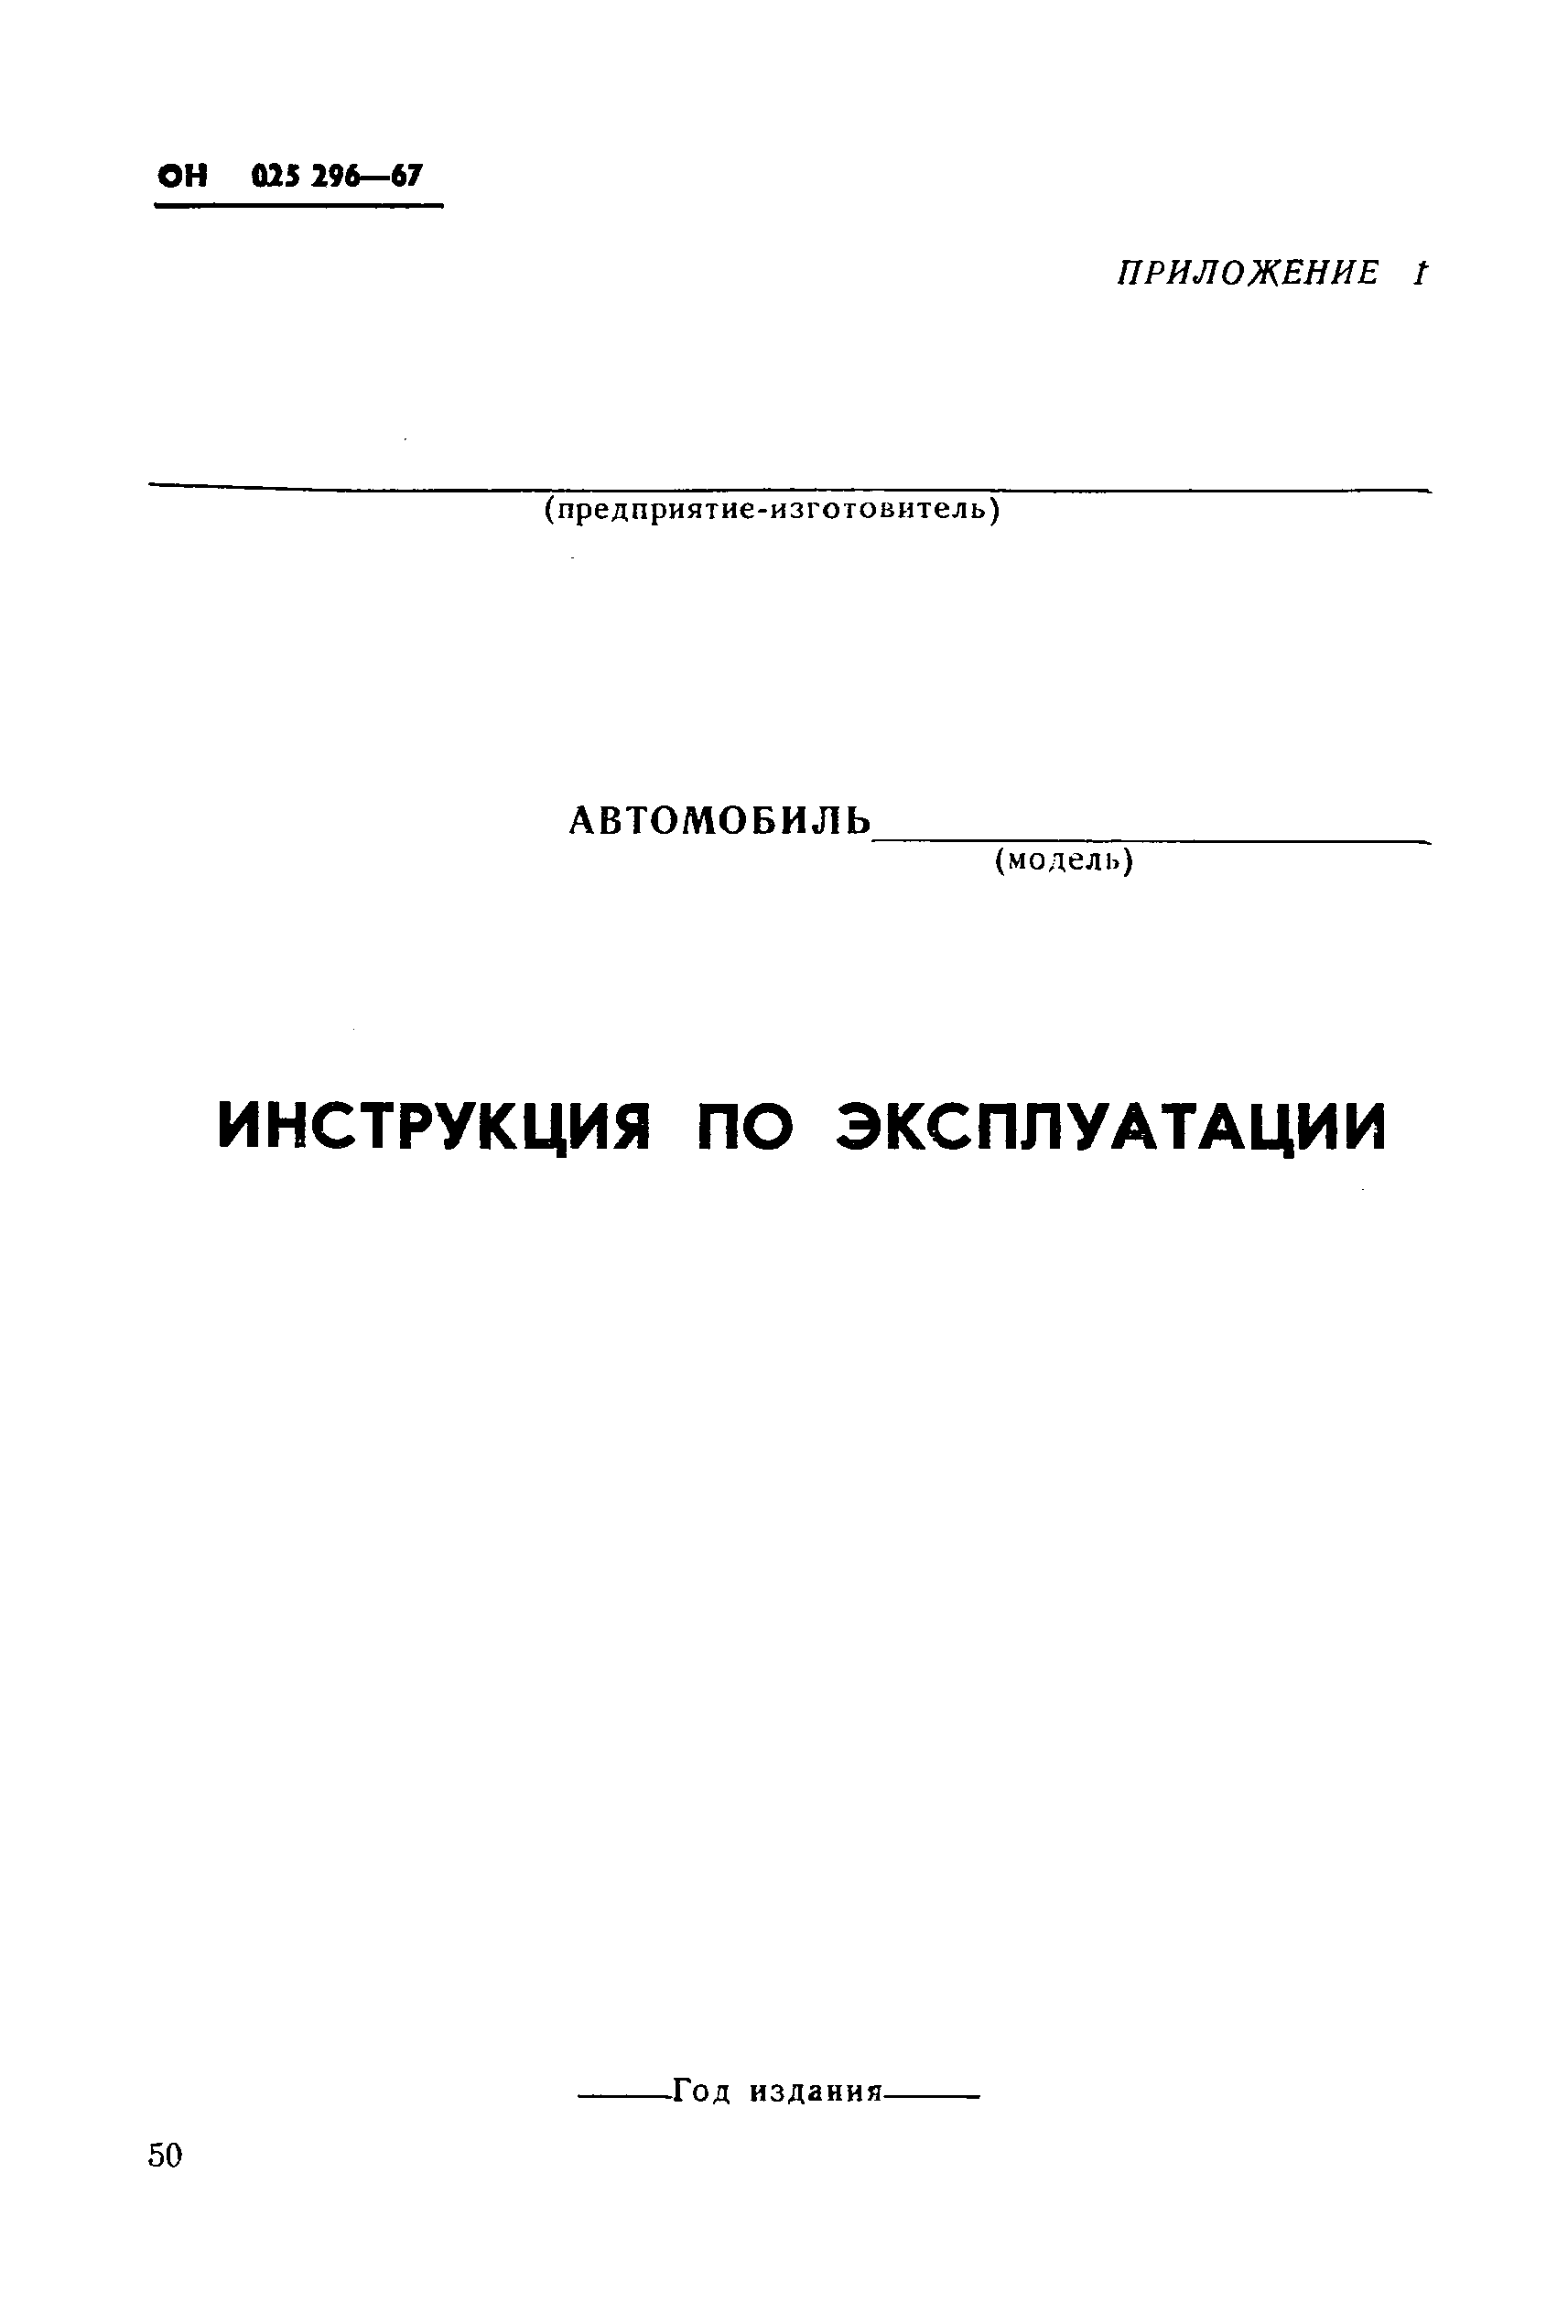 ОН 025 296-67*